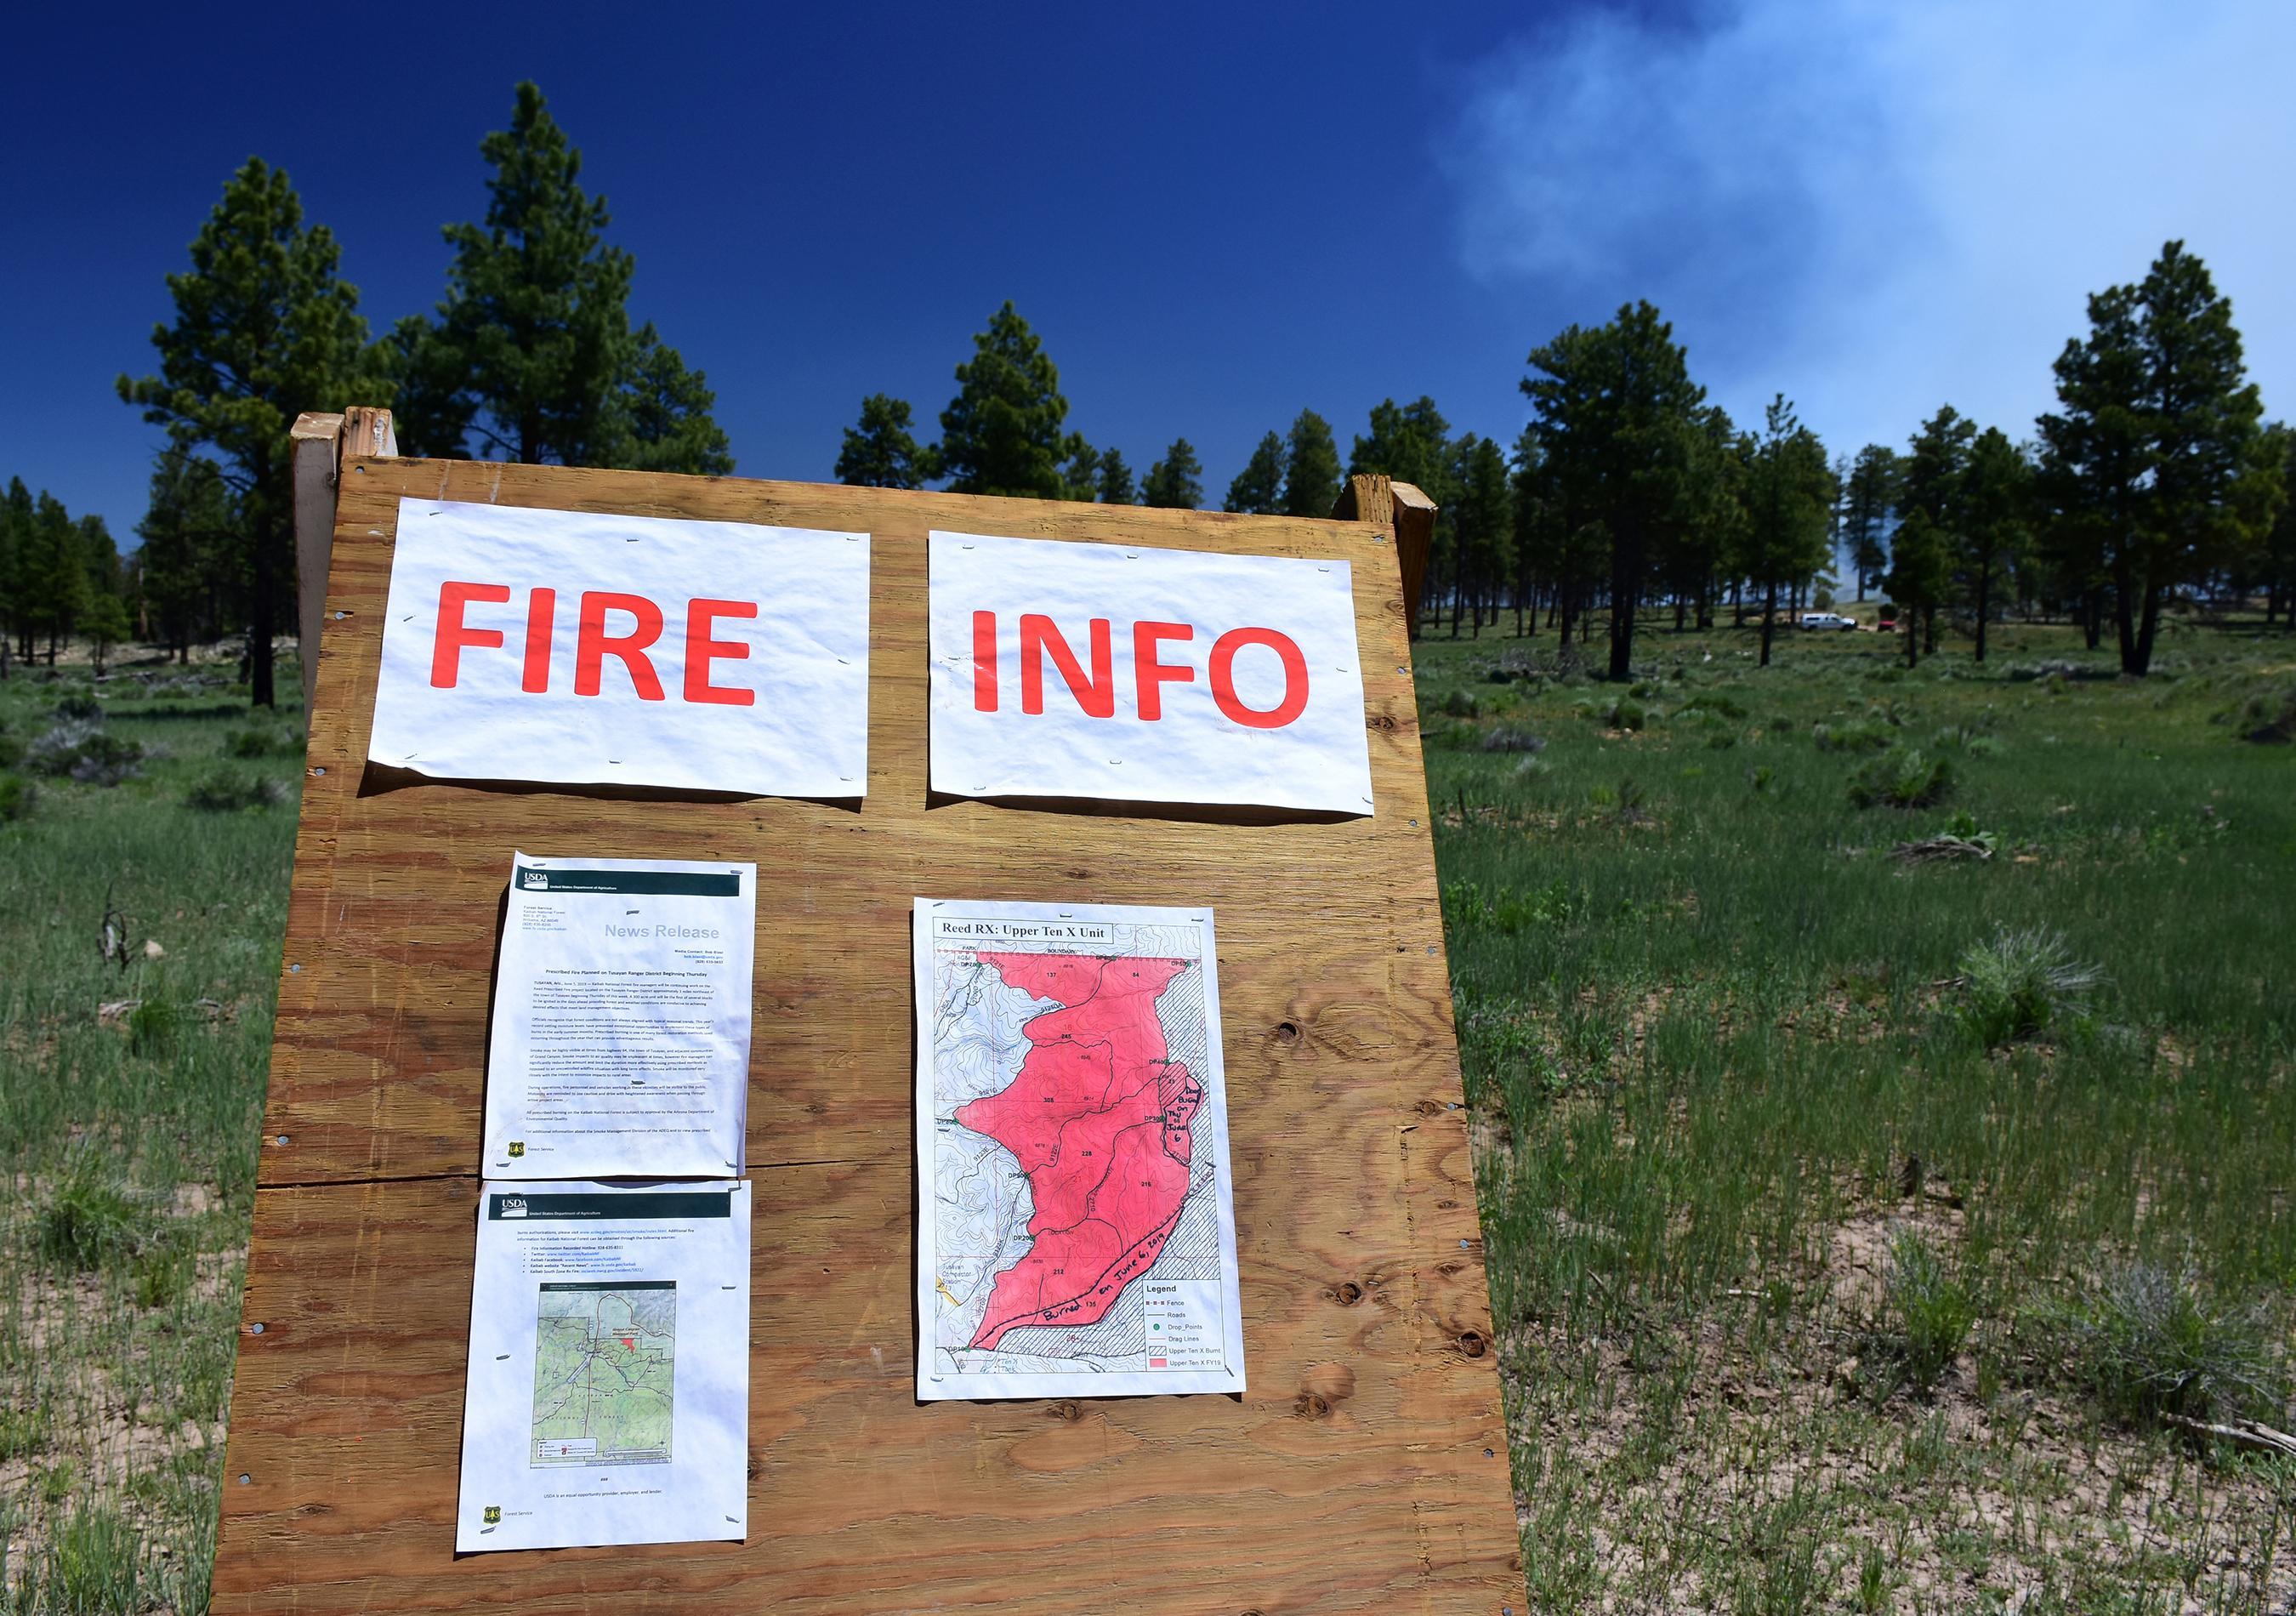 Fire information board for the Reed Prescribed Fire burning in the background.